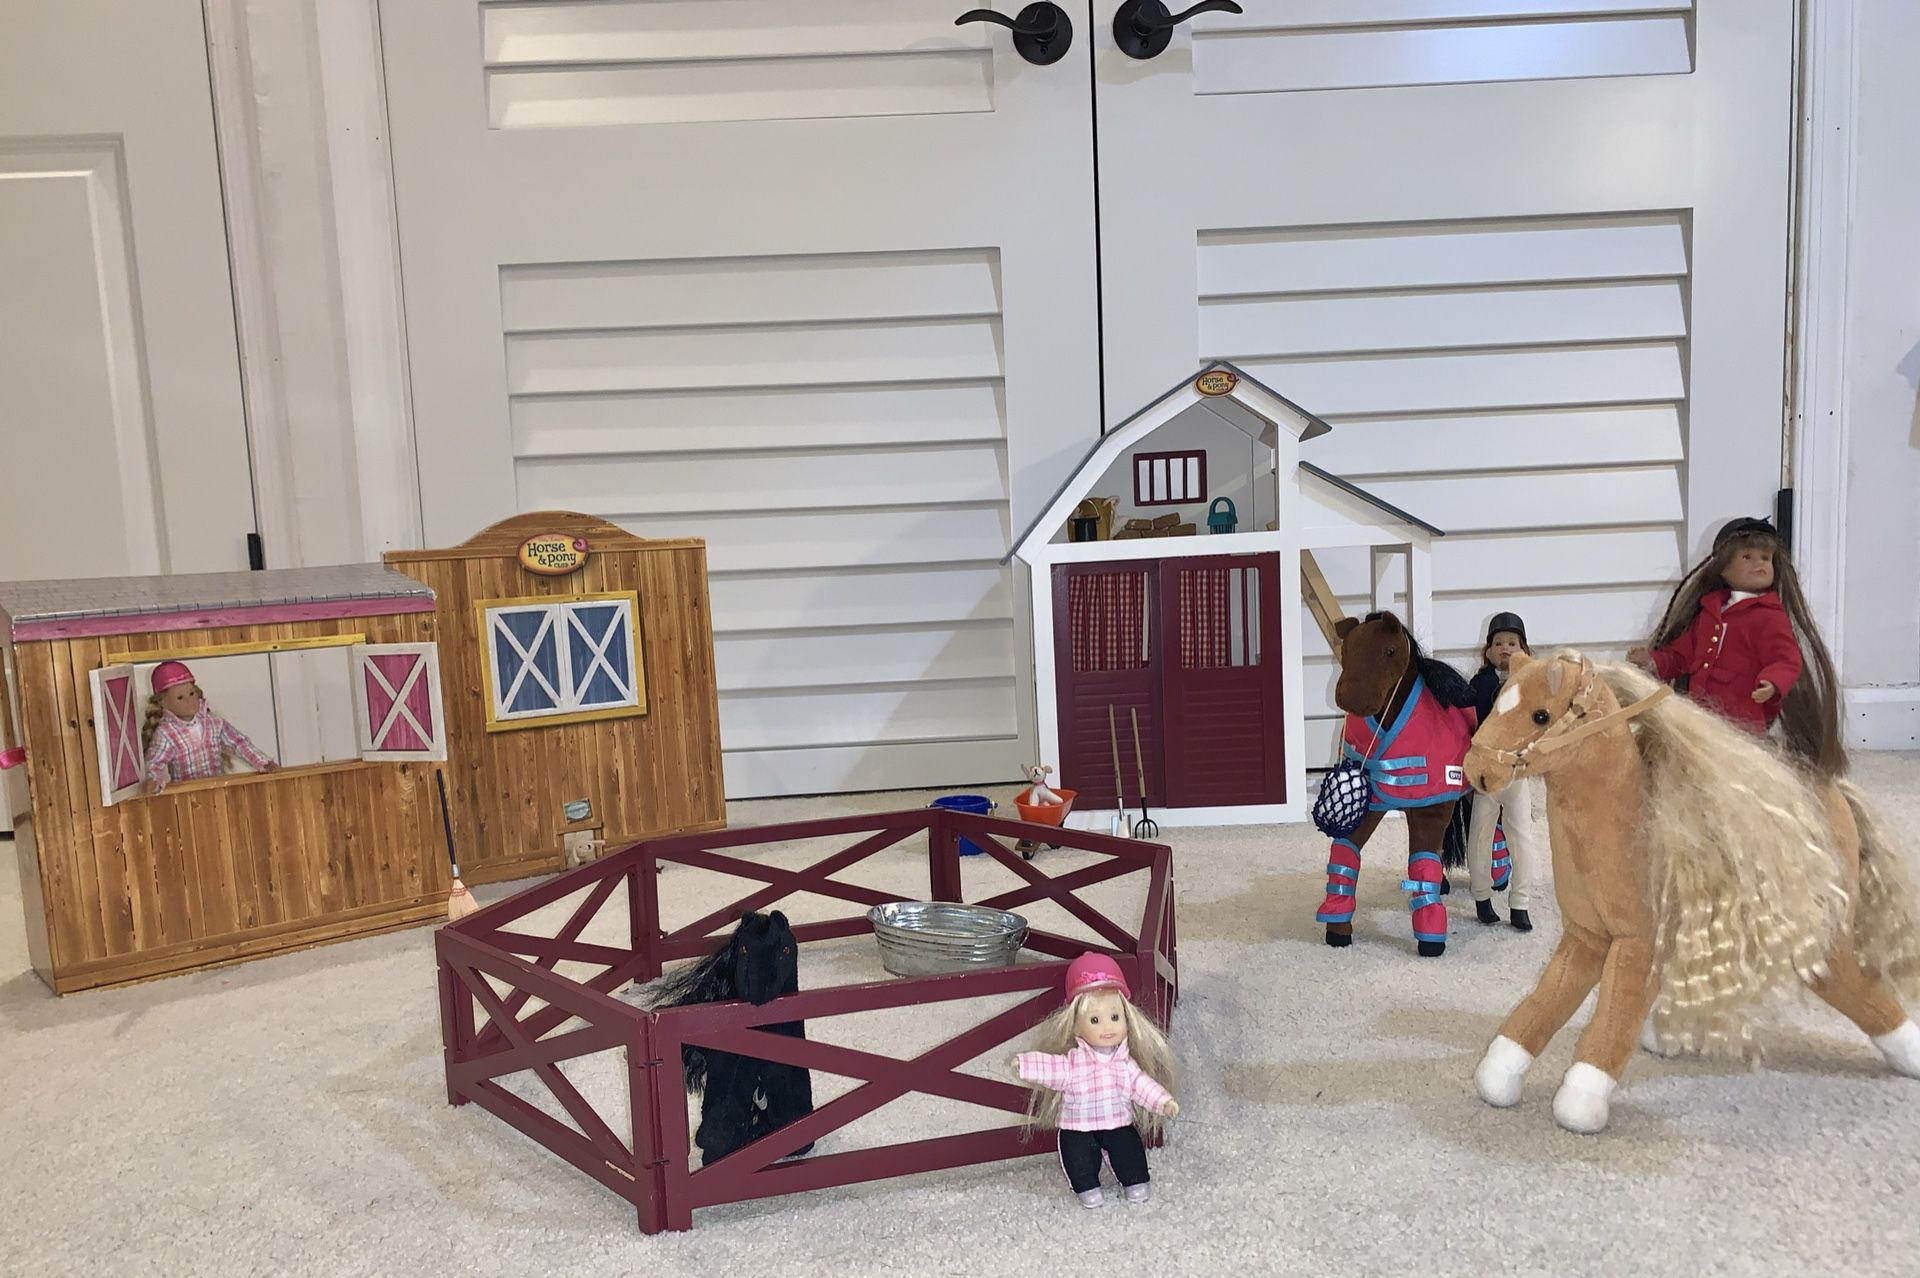 Wooden Horse Barn, Corral, Horses, Girls, Dogs, Tack, Feed Supplies & Tack Room